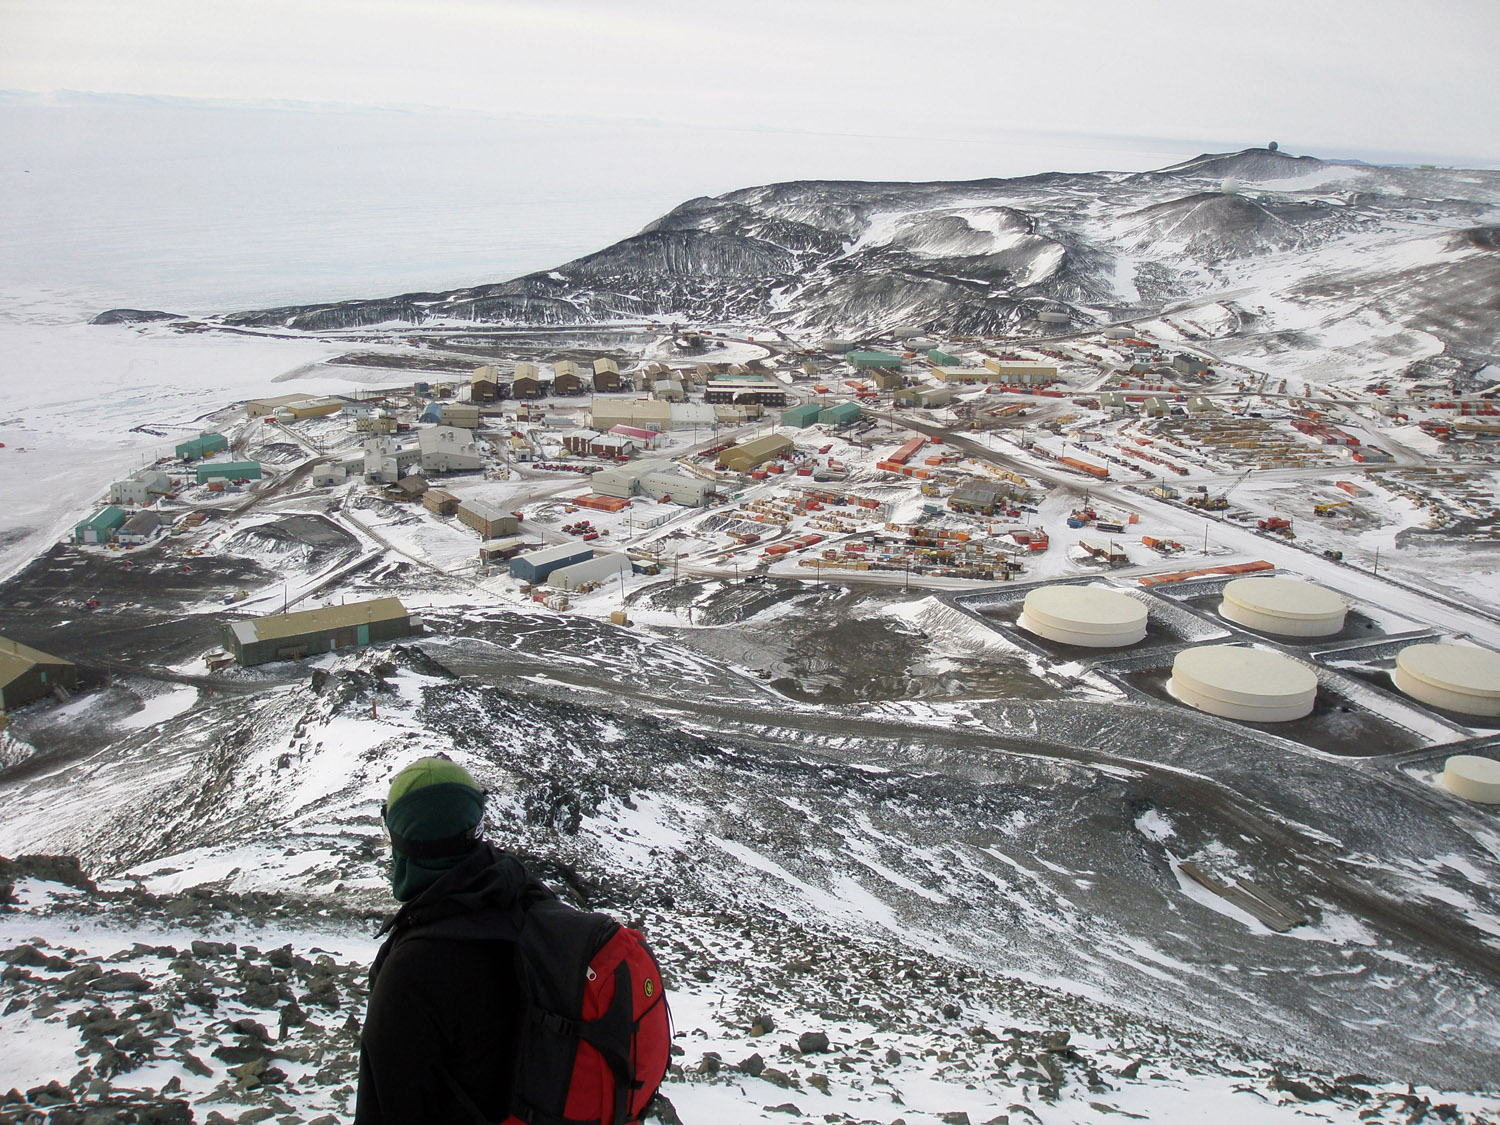 McMurdo Station, seen on the descent